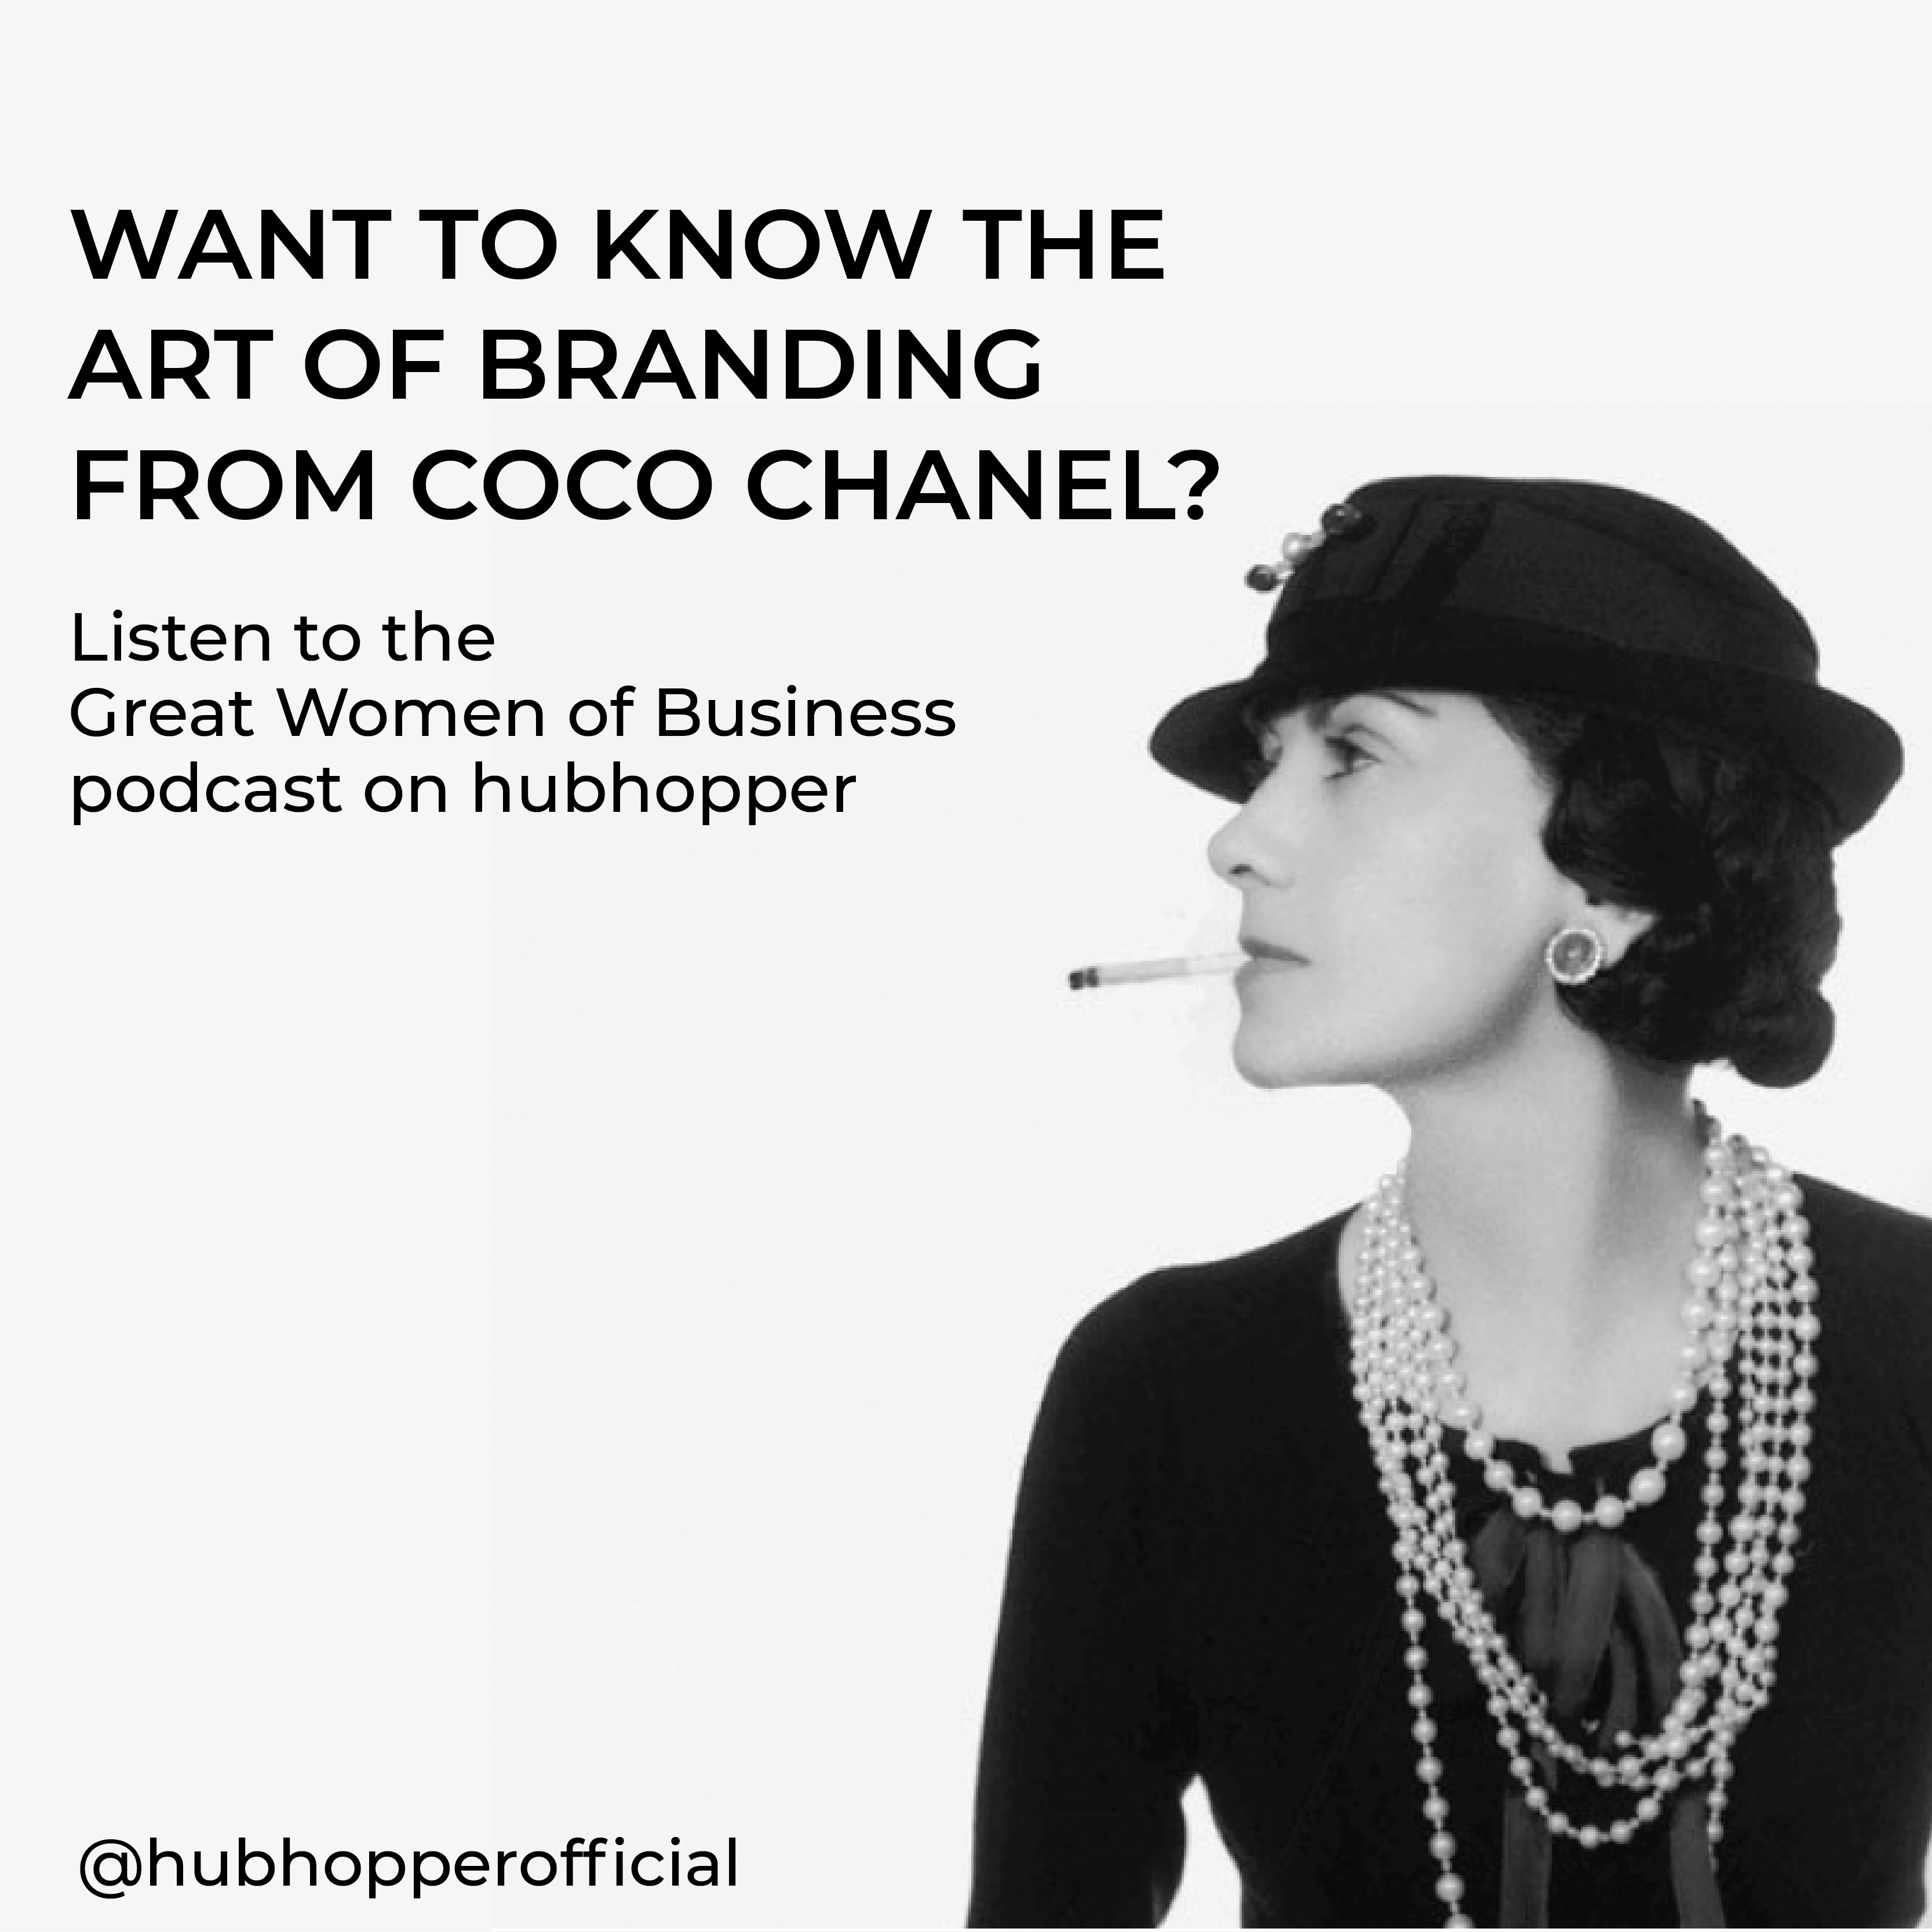 Hubhopper on X: From Coco Chanel to Mrs. Fields, know about the triumphs  of individuals ahead of their time. Their stories tell us about their most  innovative business principles and how those